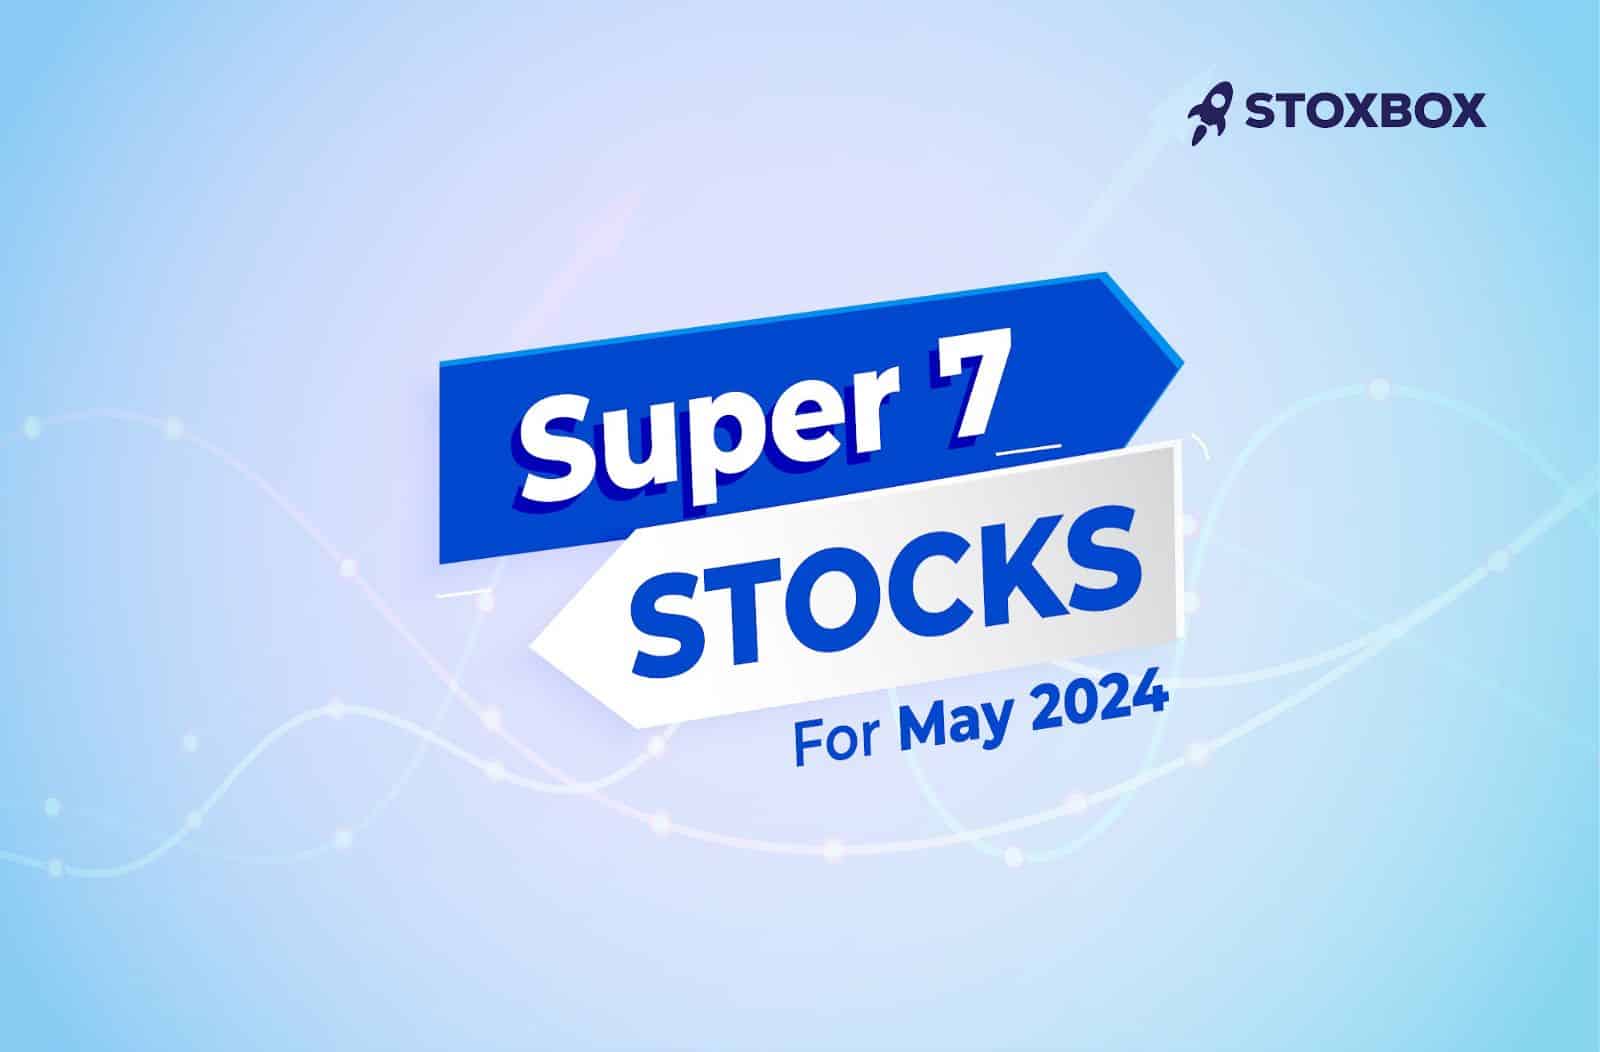 7 Super Stocks for May 2024